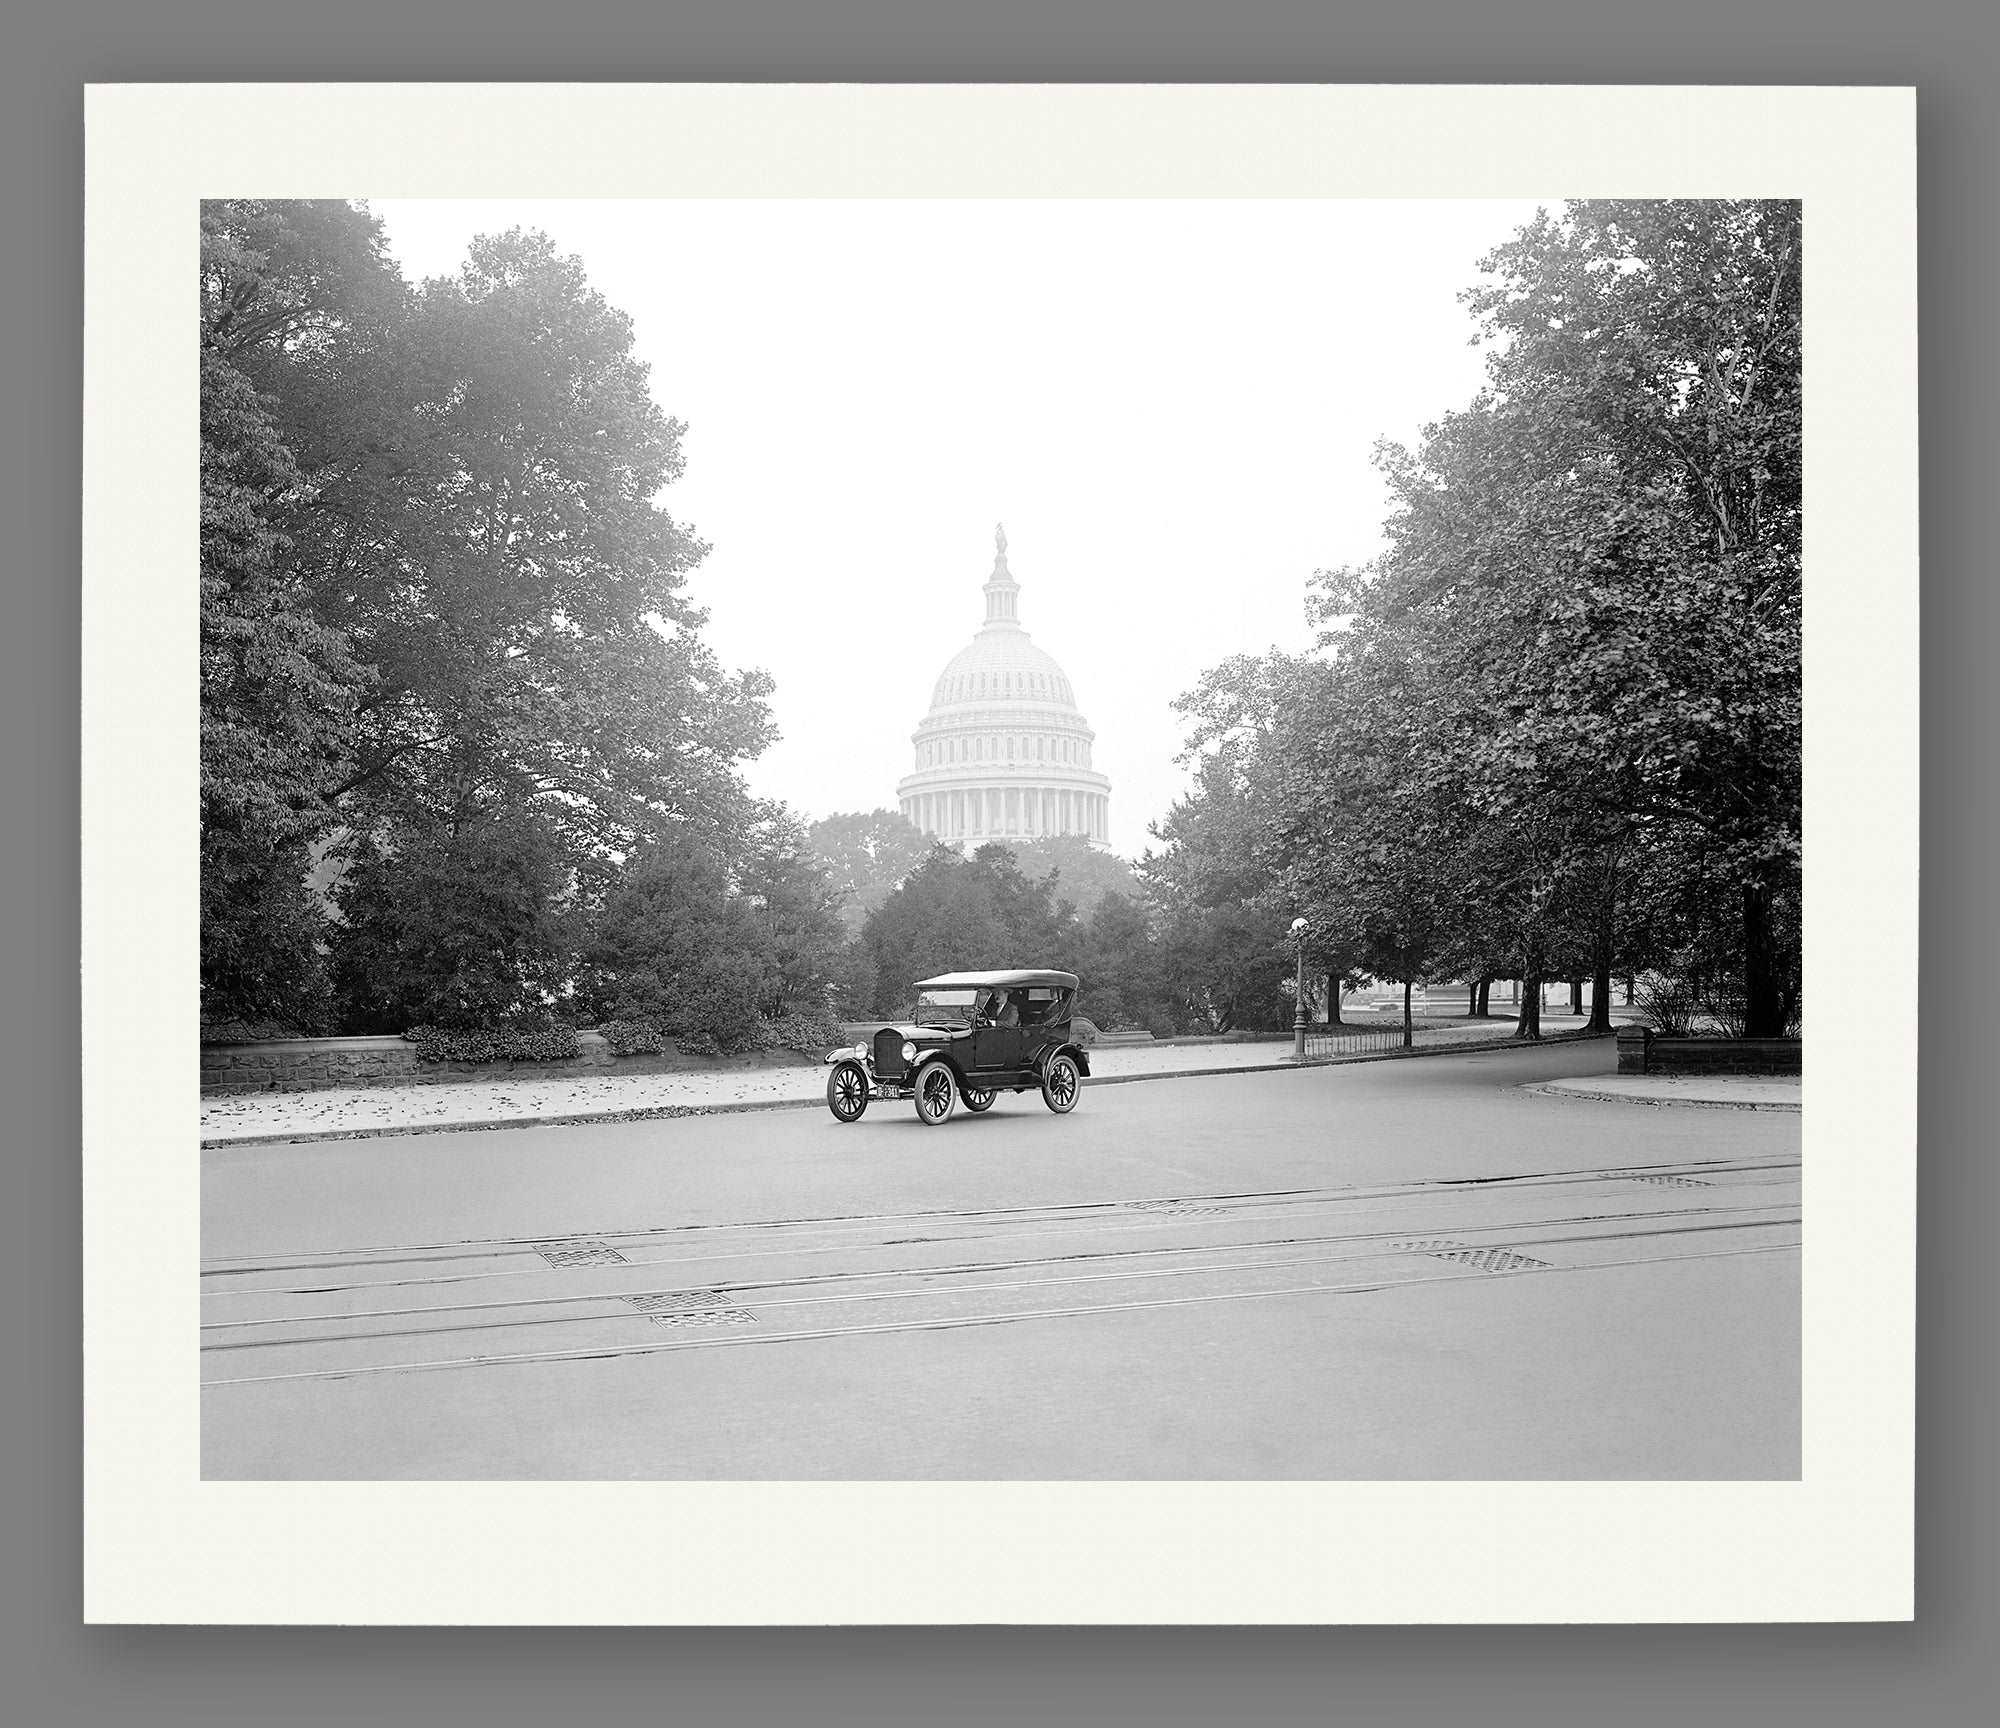 A fine art paper print of a vintage image of a Ford Touring Car in front of the Capitol Dome